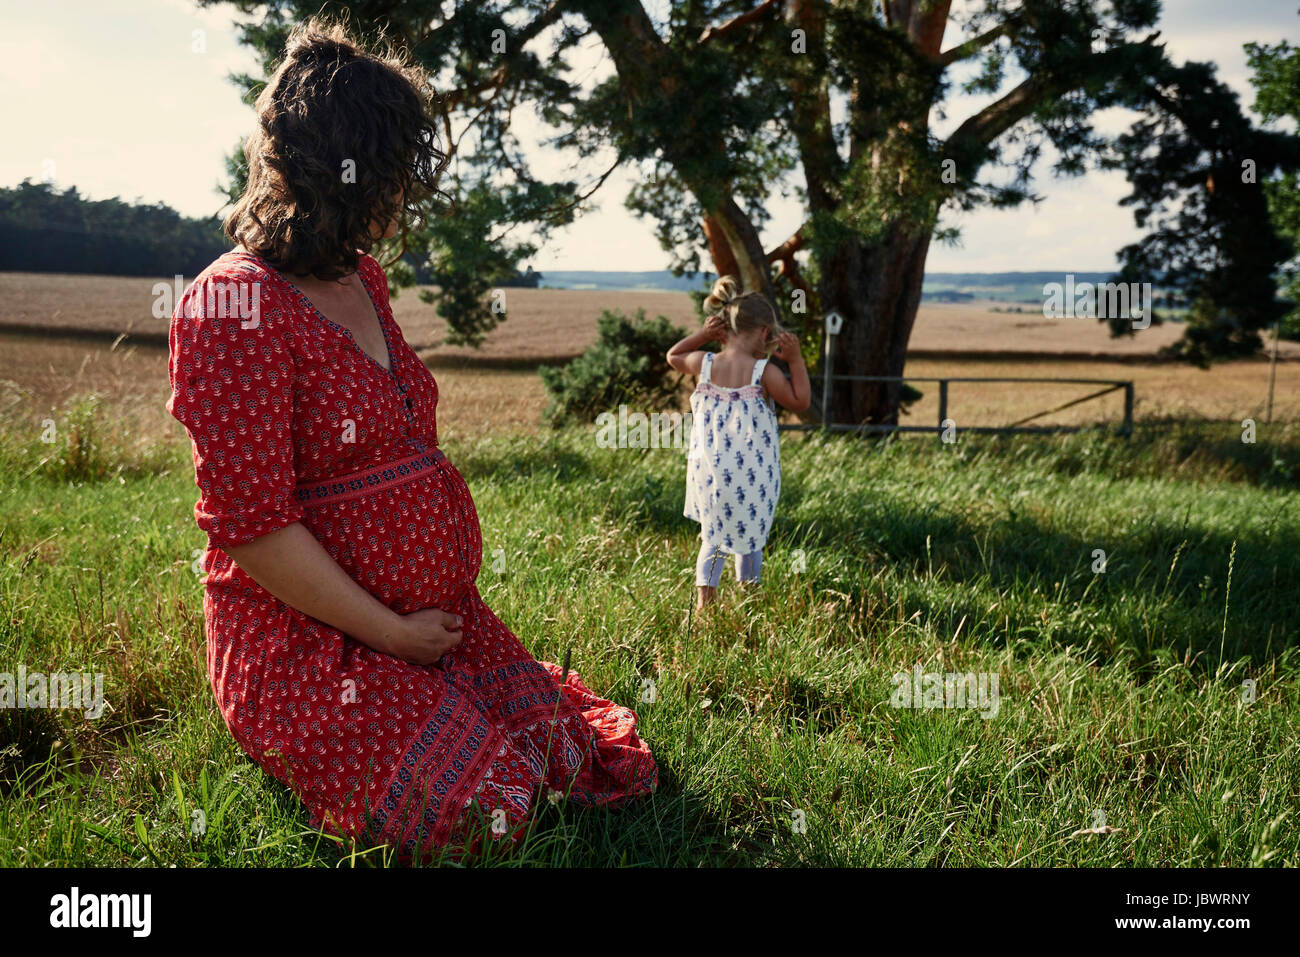 Pregnant woman sitting in field watching toddler daughter Stock Photo